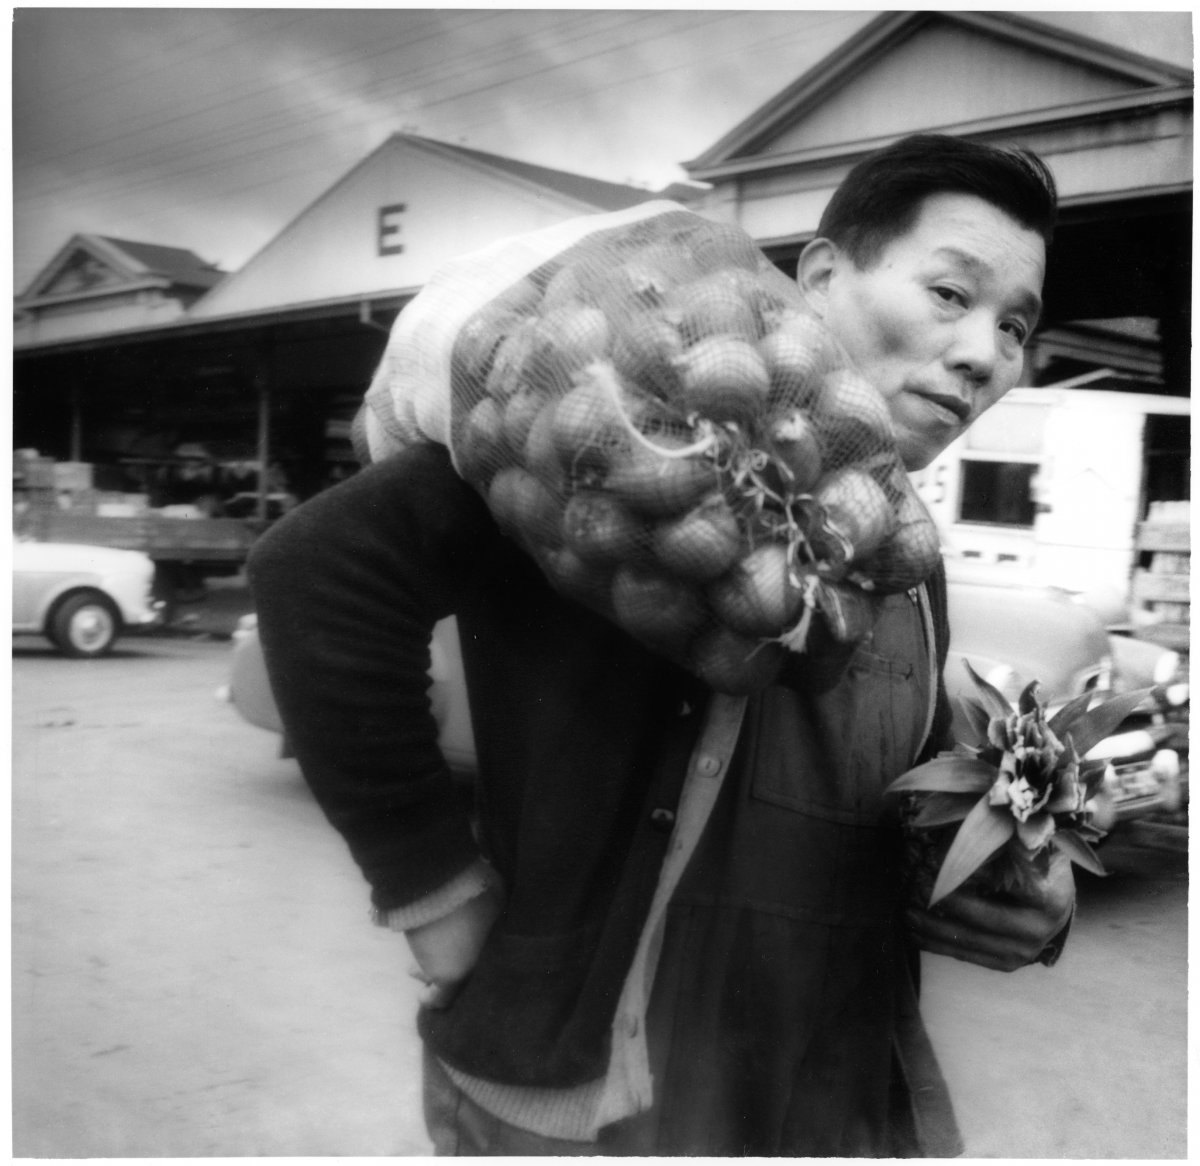 A man carriees a bag of onions over his shoulder. Behind him are the sheds of the Queen Victoria Markets, a large produce market. The man is wearing dark overalls and two cardigans